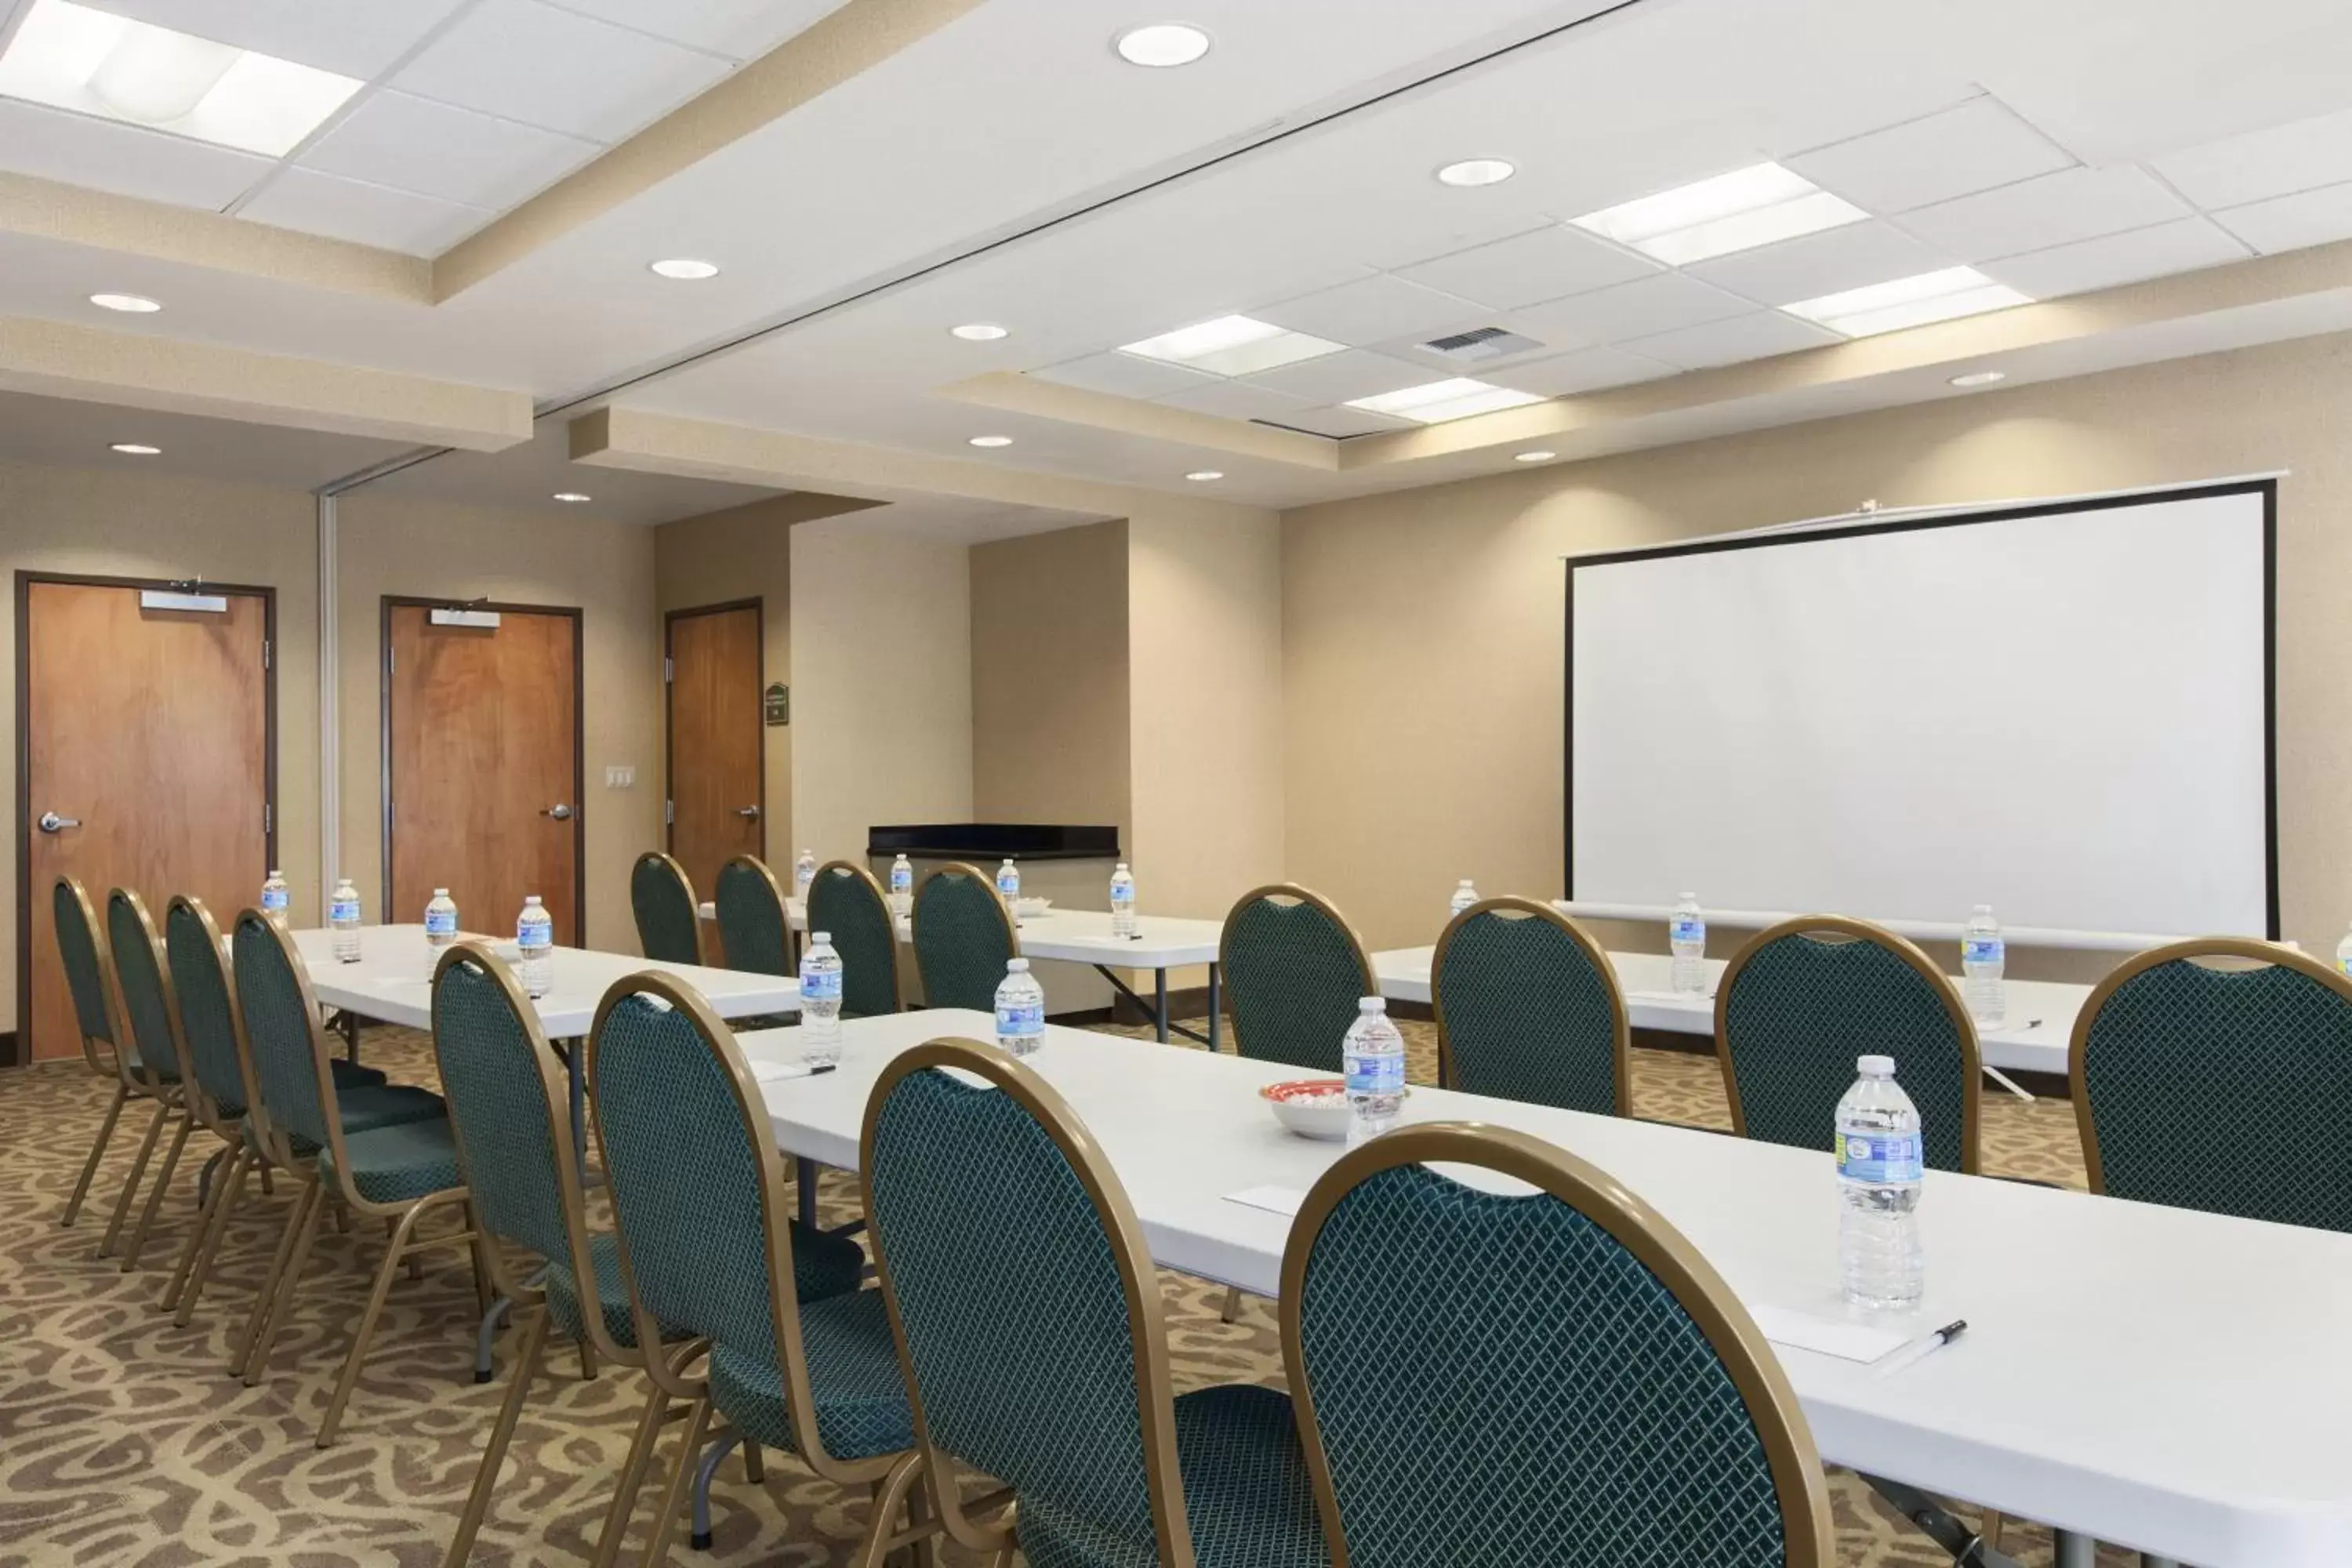 Area and facilities in Country Inn & Suites by Radisson, Dixon, CA - UC Davis Area